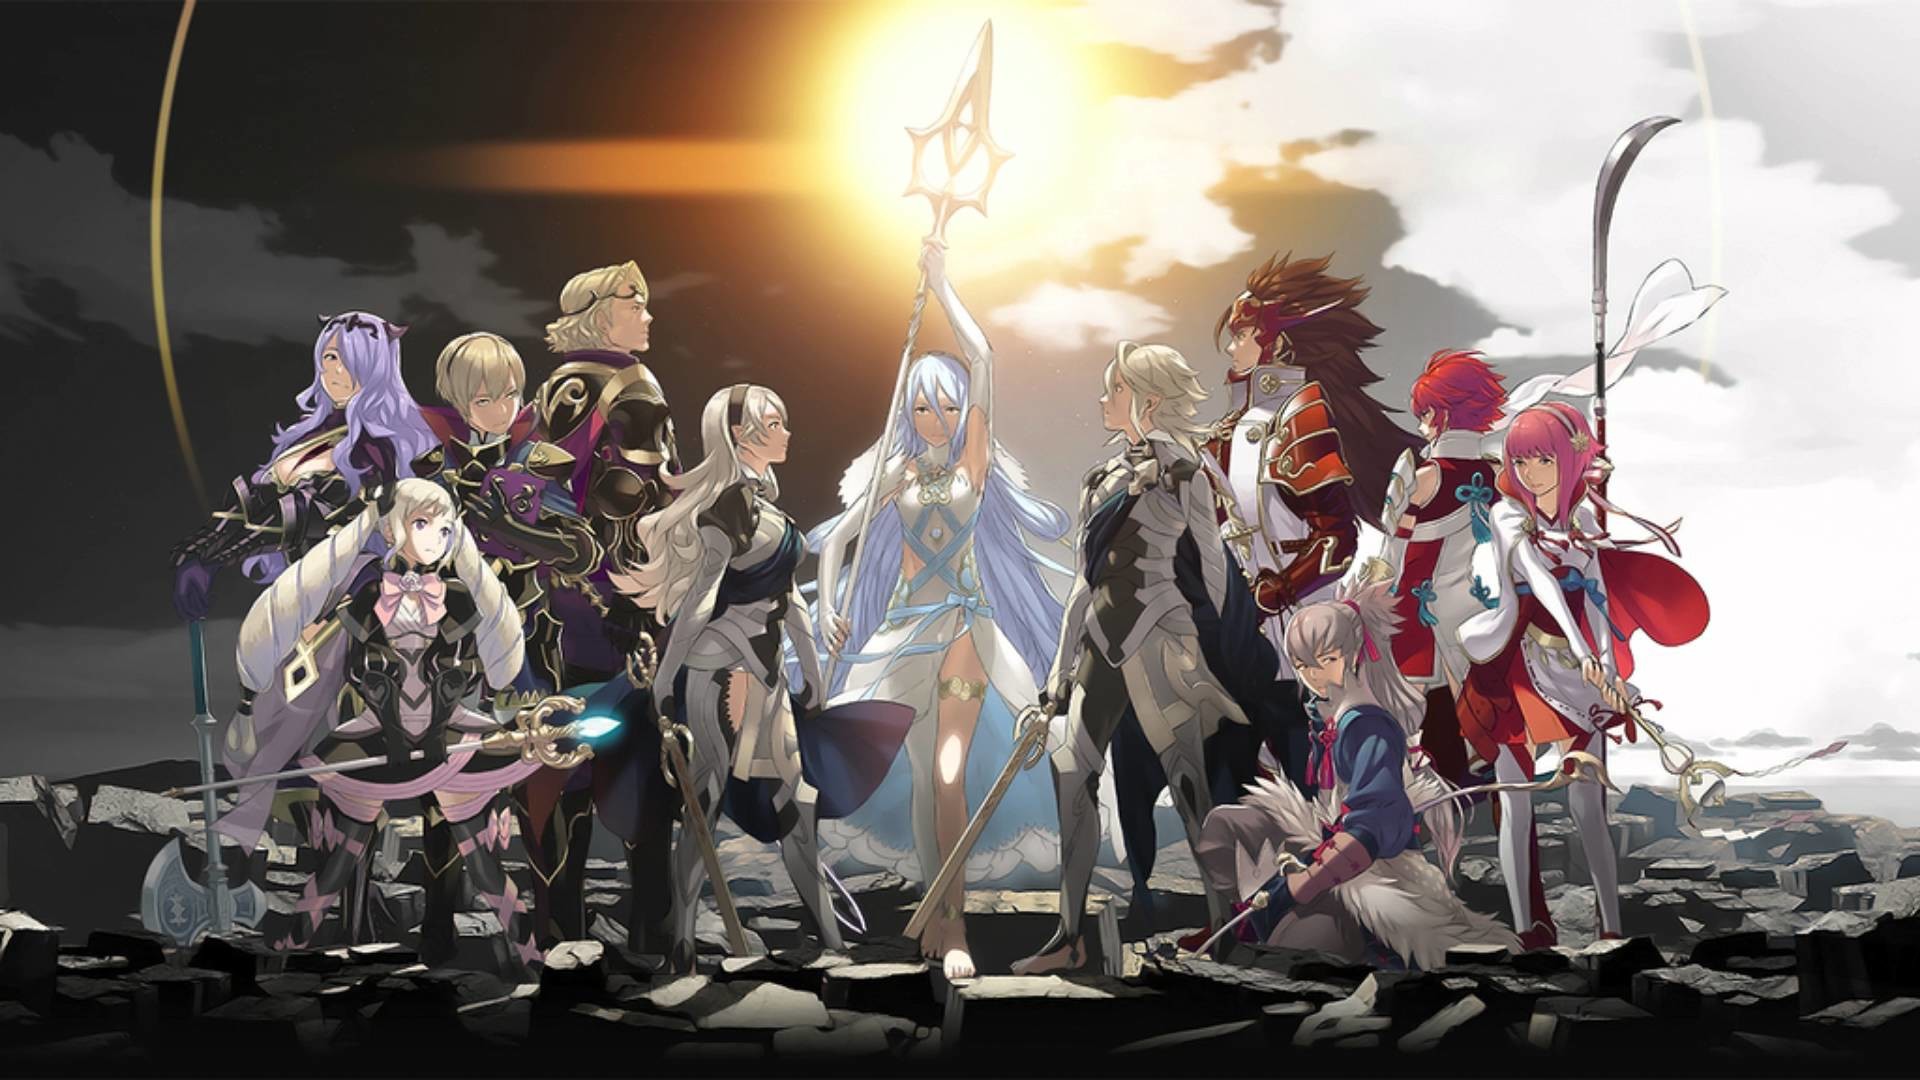 1920x1080 Fire Emblem: Fates - End of All (Sky, Land, and Below rotation) - YouTube